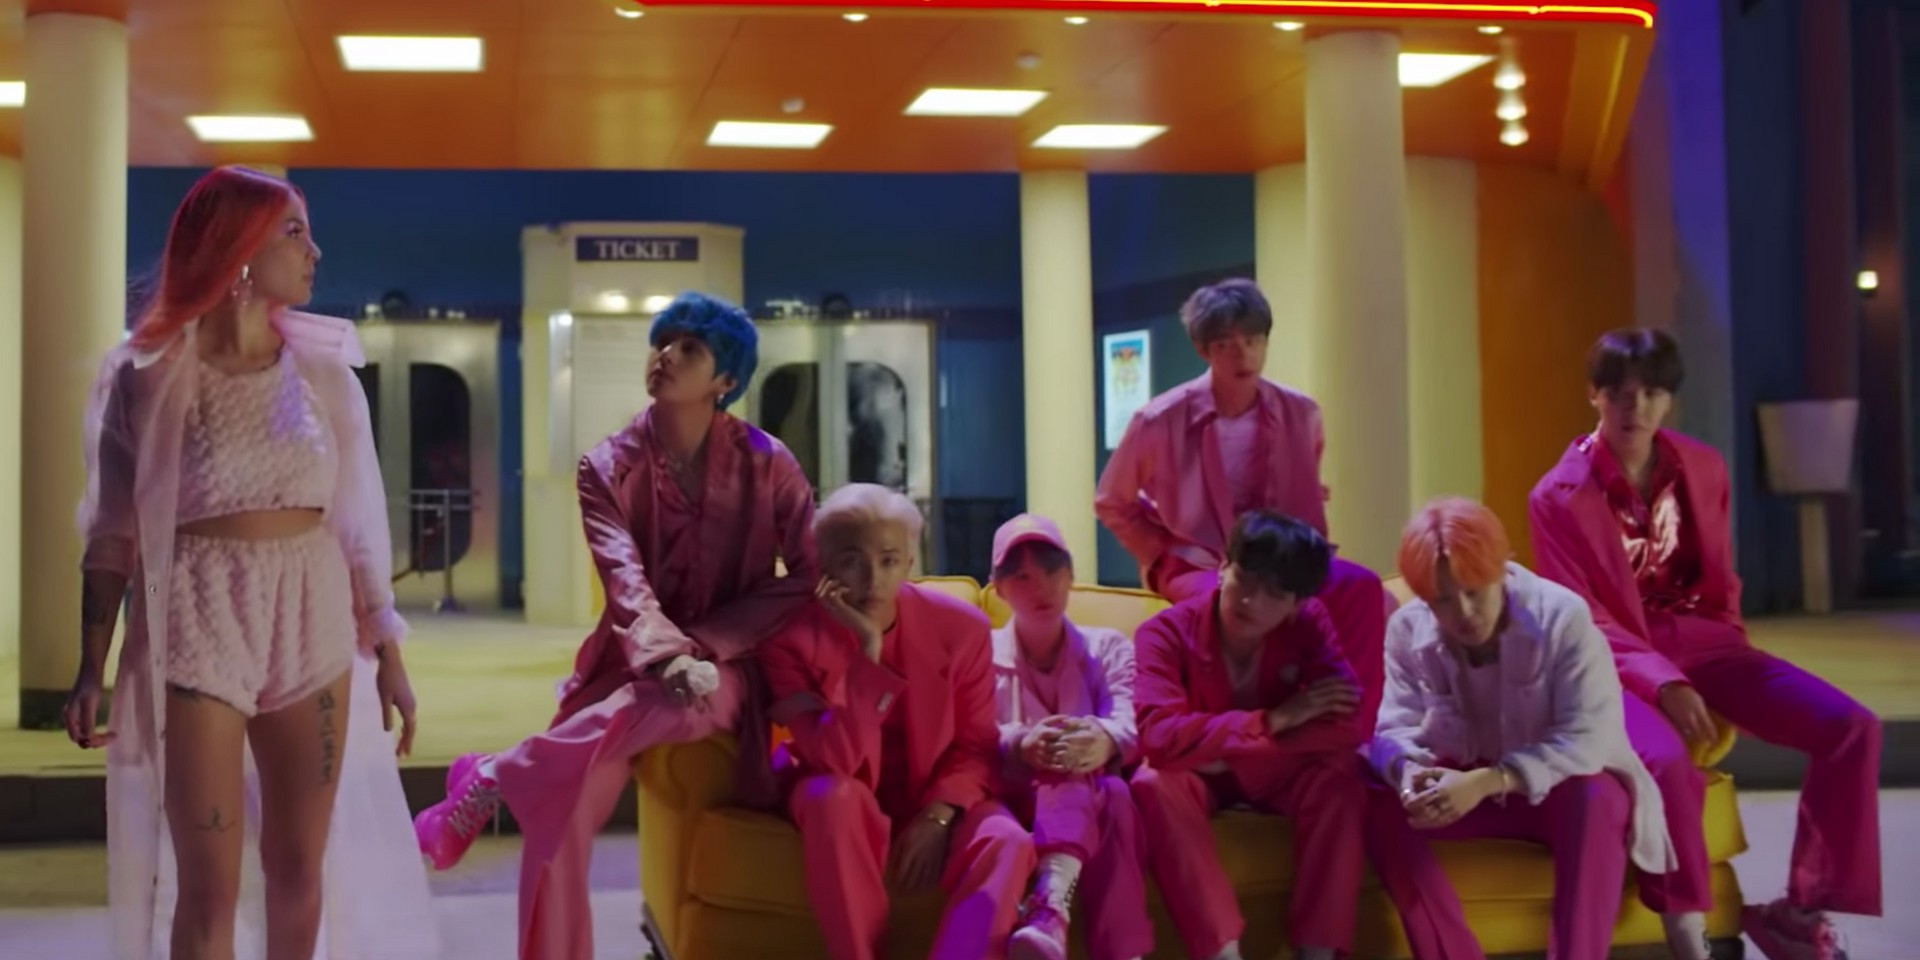 BTS previews new collaboration with Halsey, 'Boy With Luv' – watch 